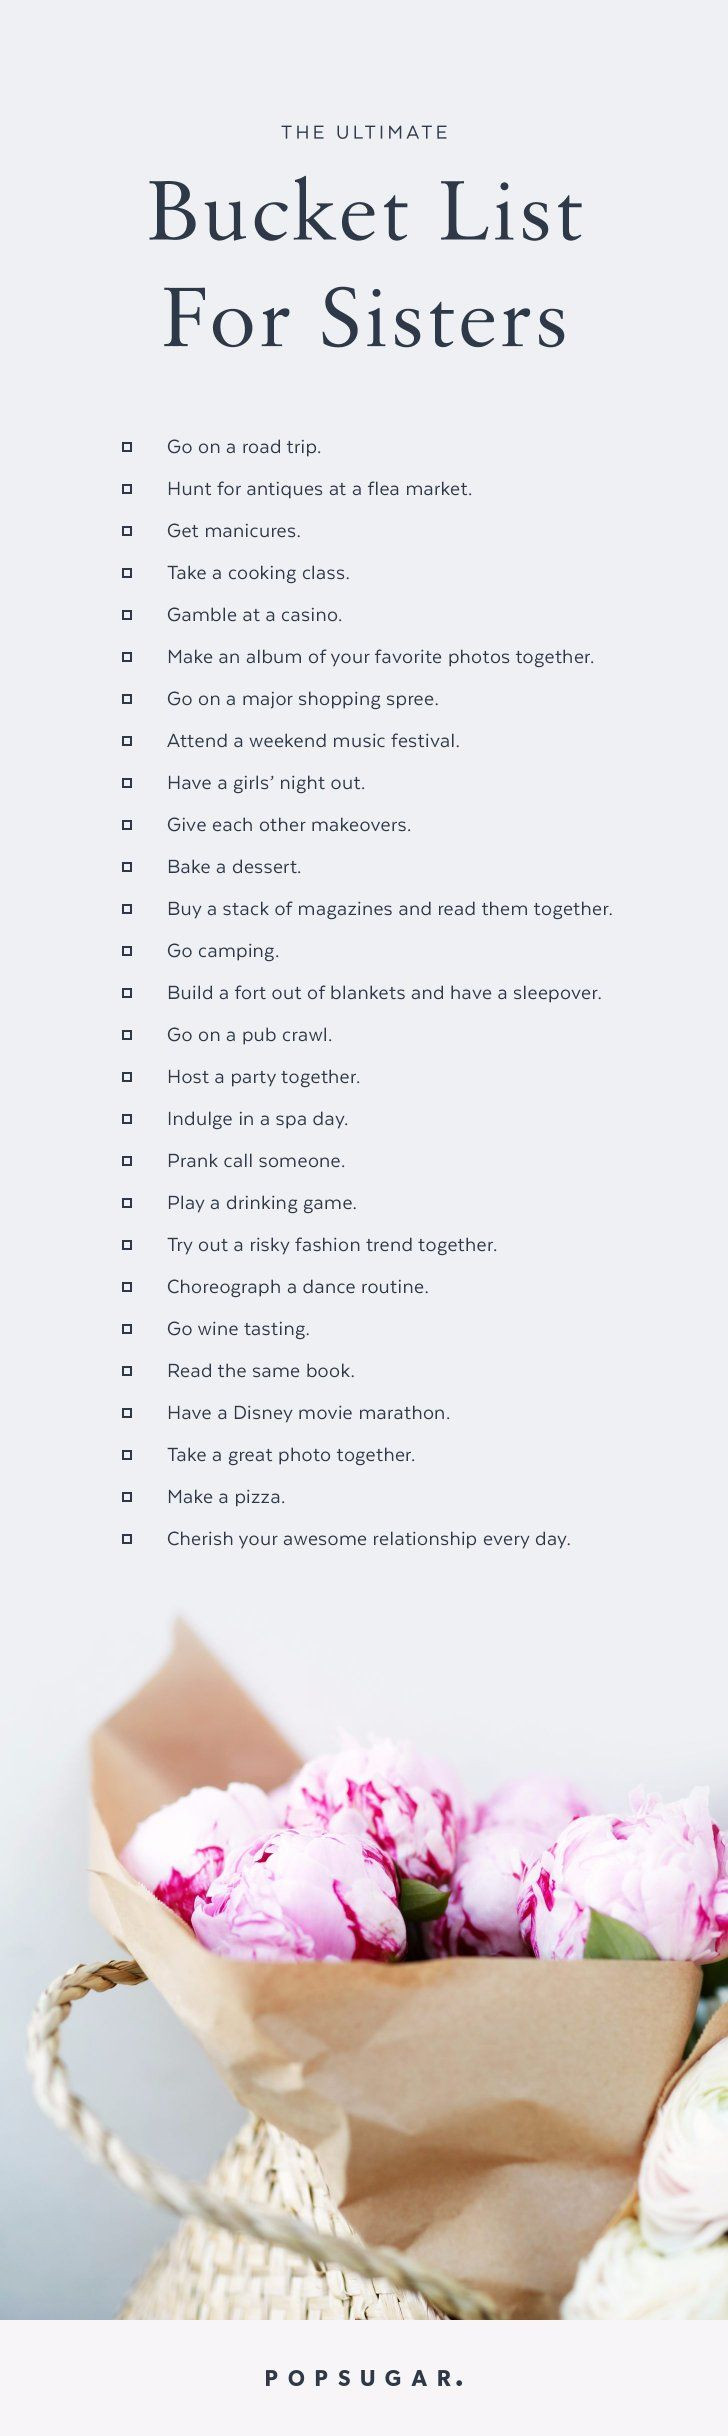 Quote For Sister Birthday
 The Ultimate Bucket List For Sisters